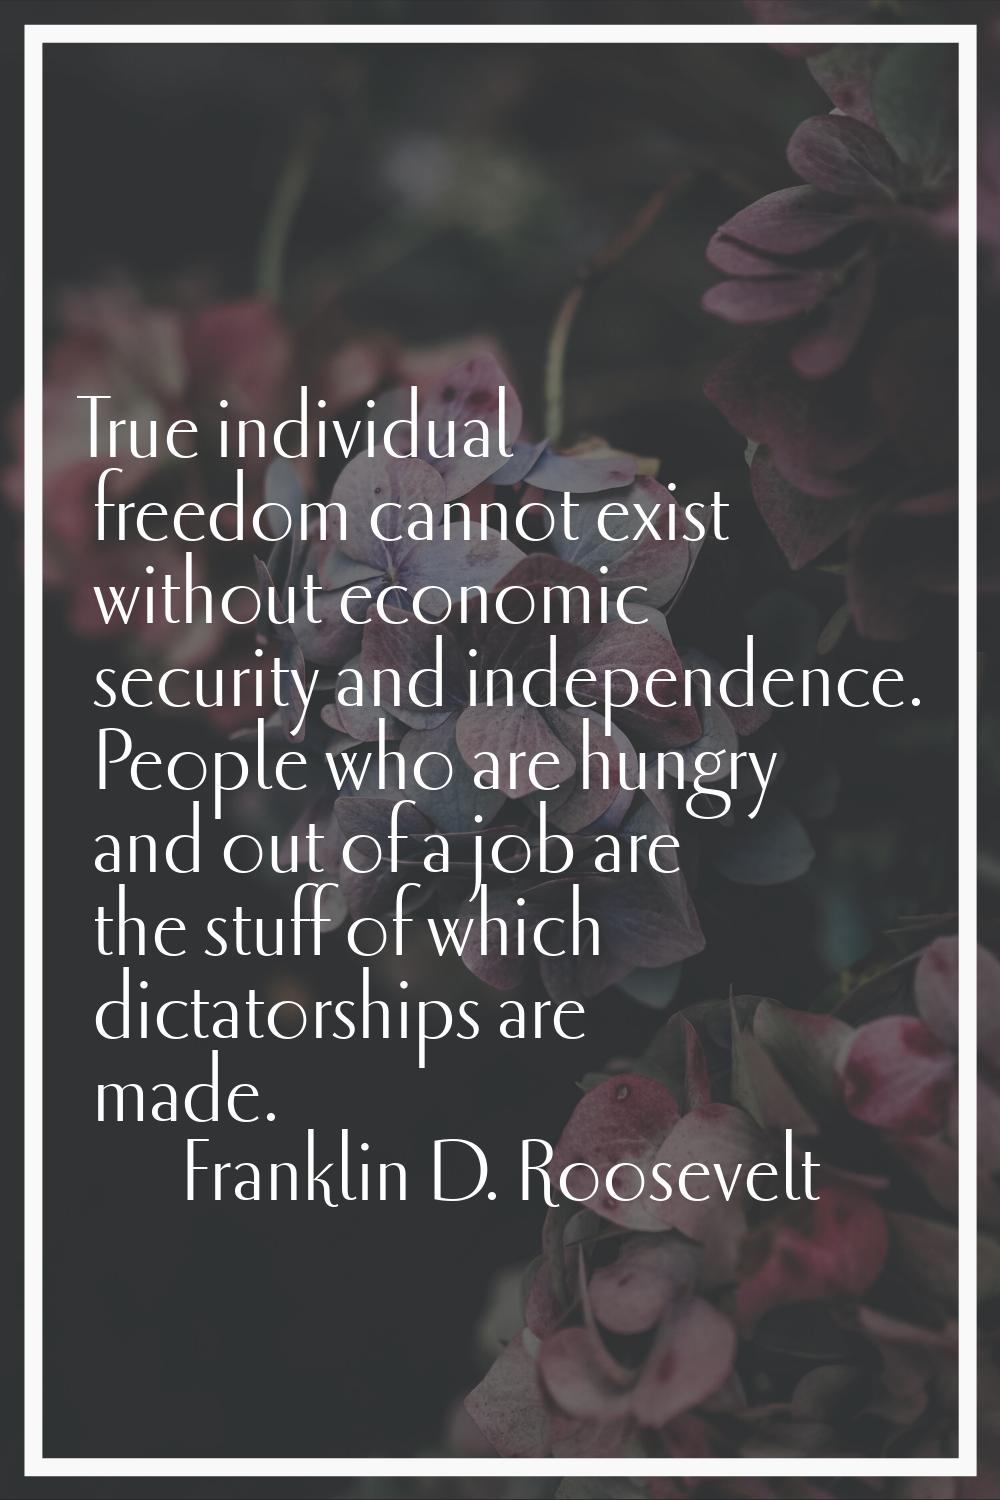 True individual freedom cannot exist without economic security and independence. People who are hun